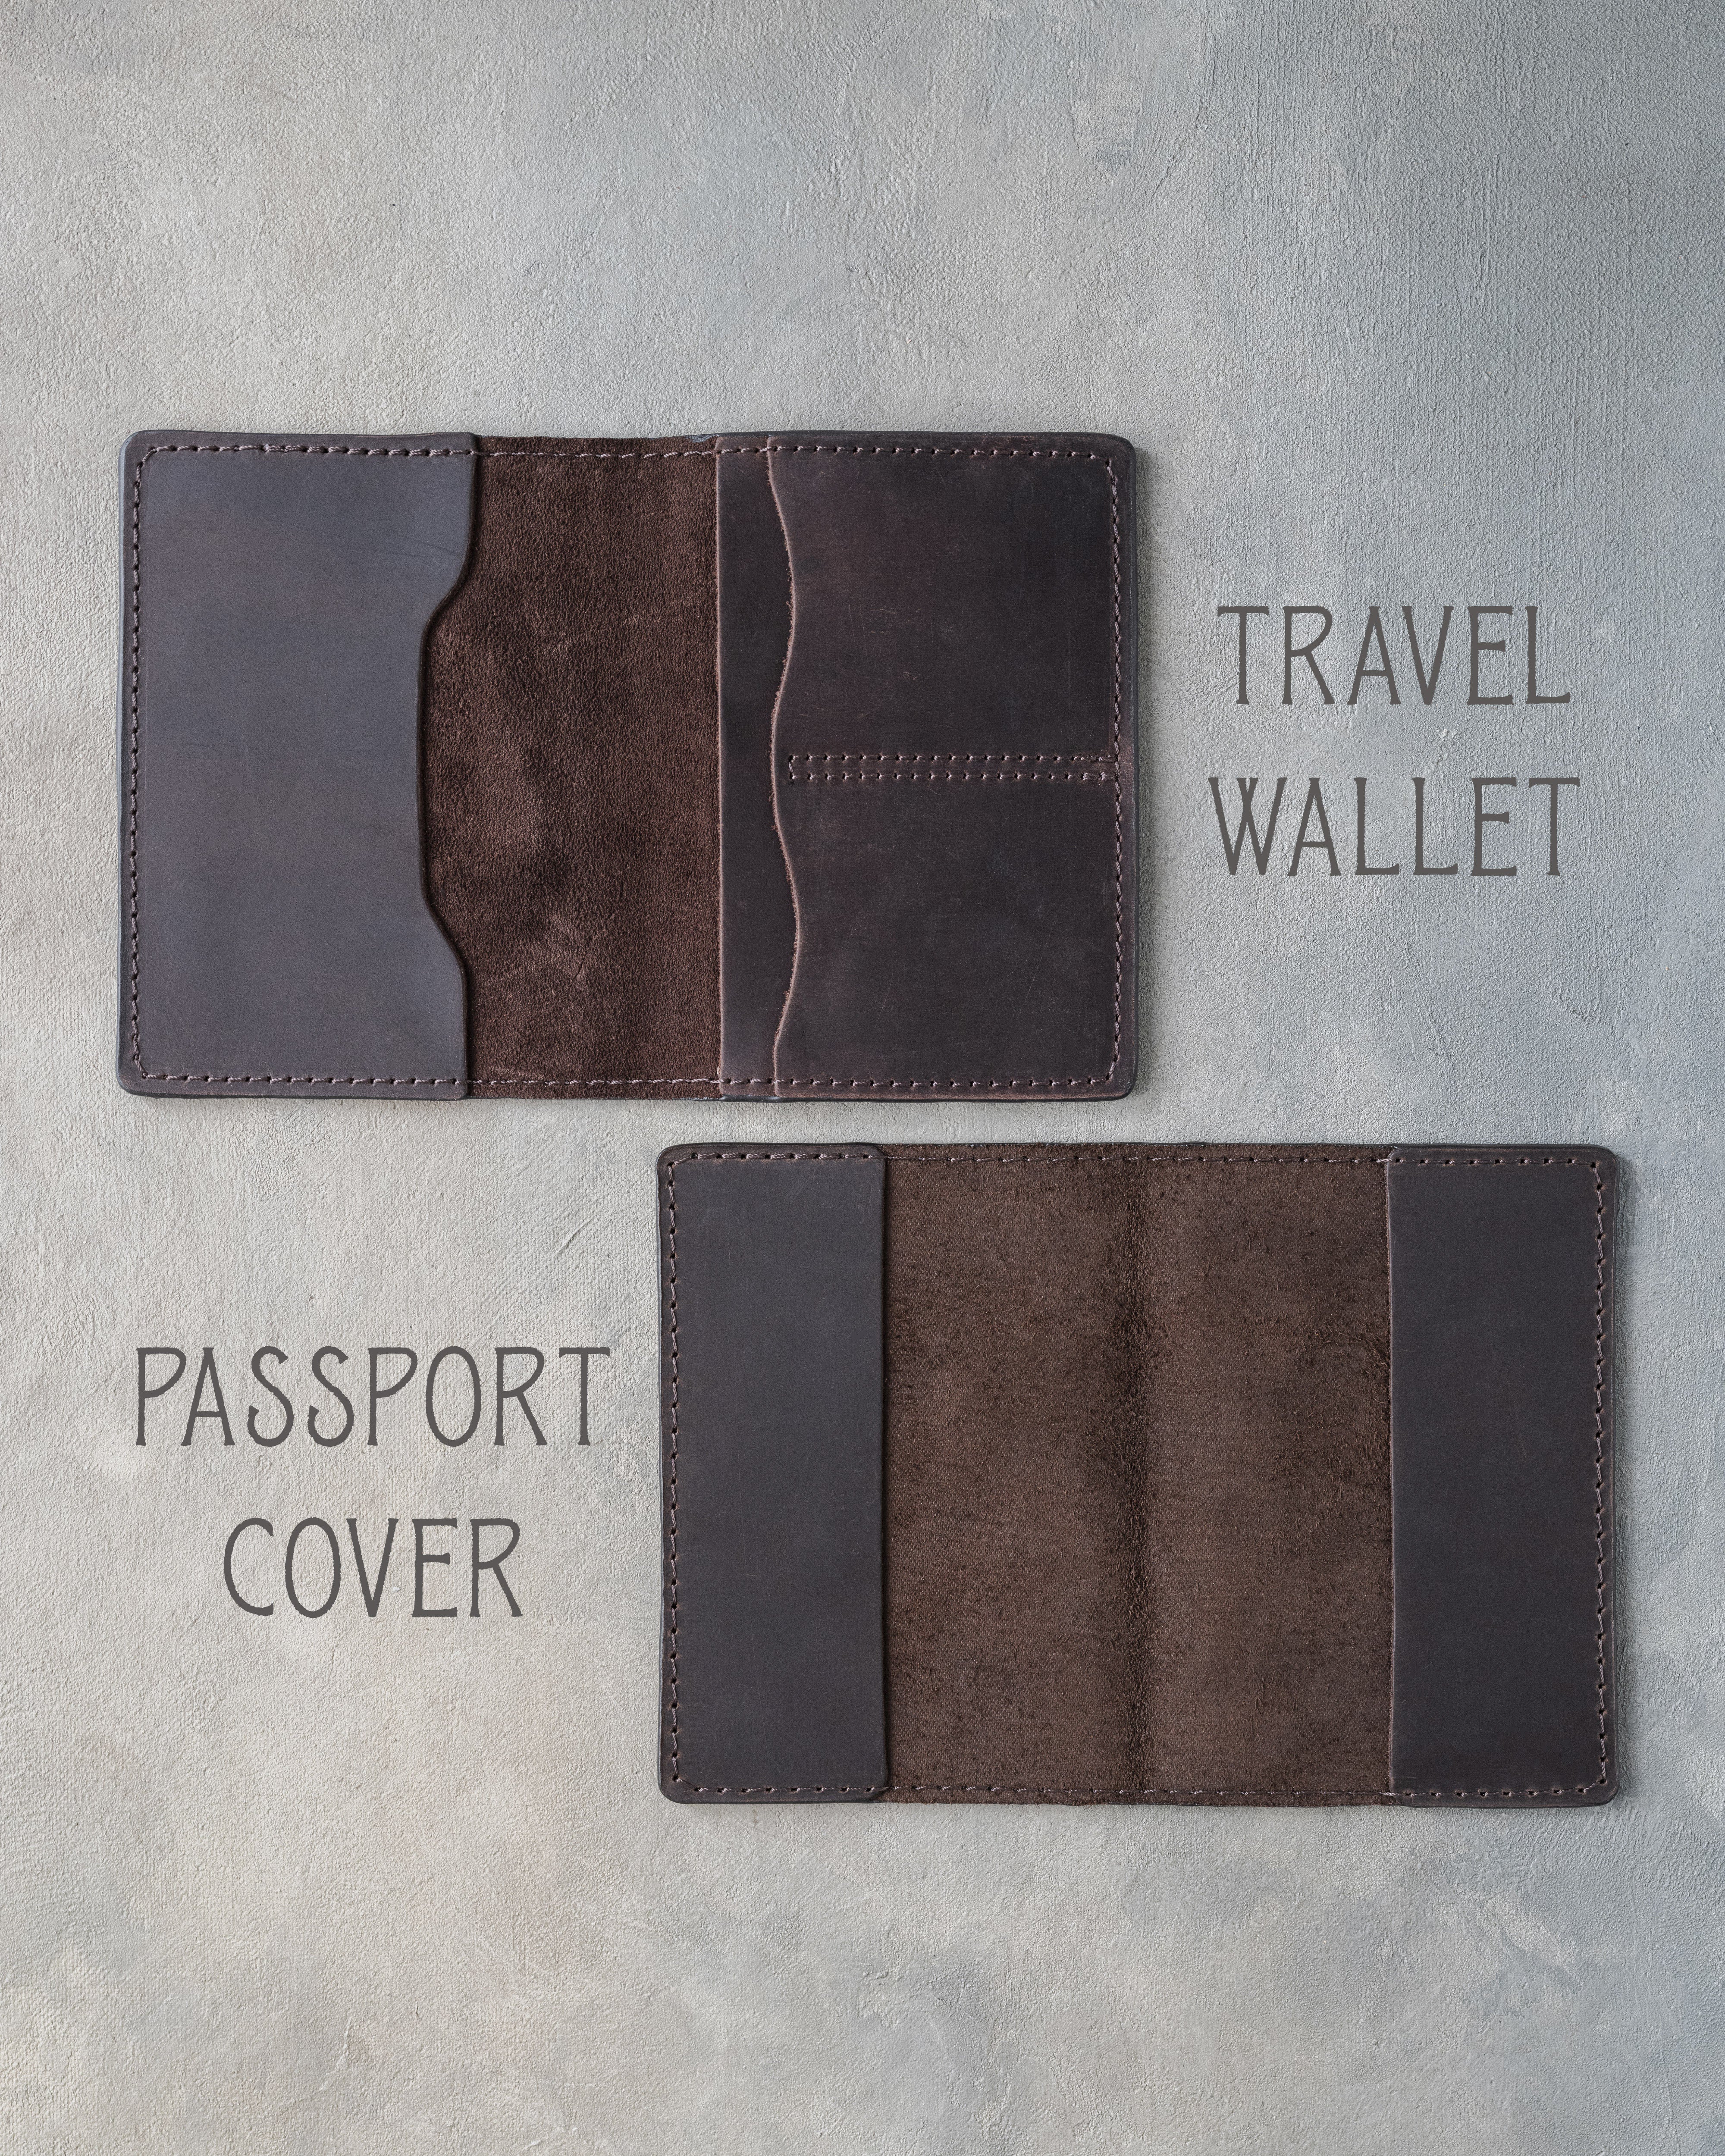 Personalized Passport Cover / Travel Wallet In Caramel Leather